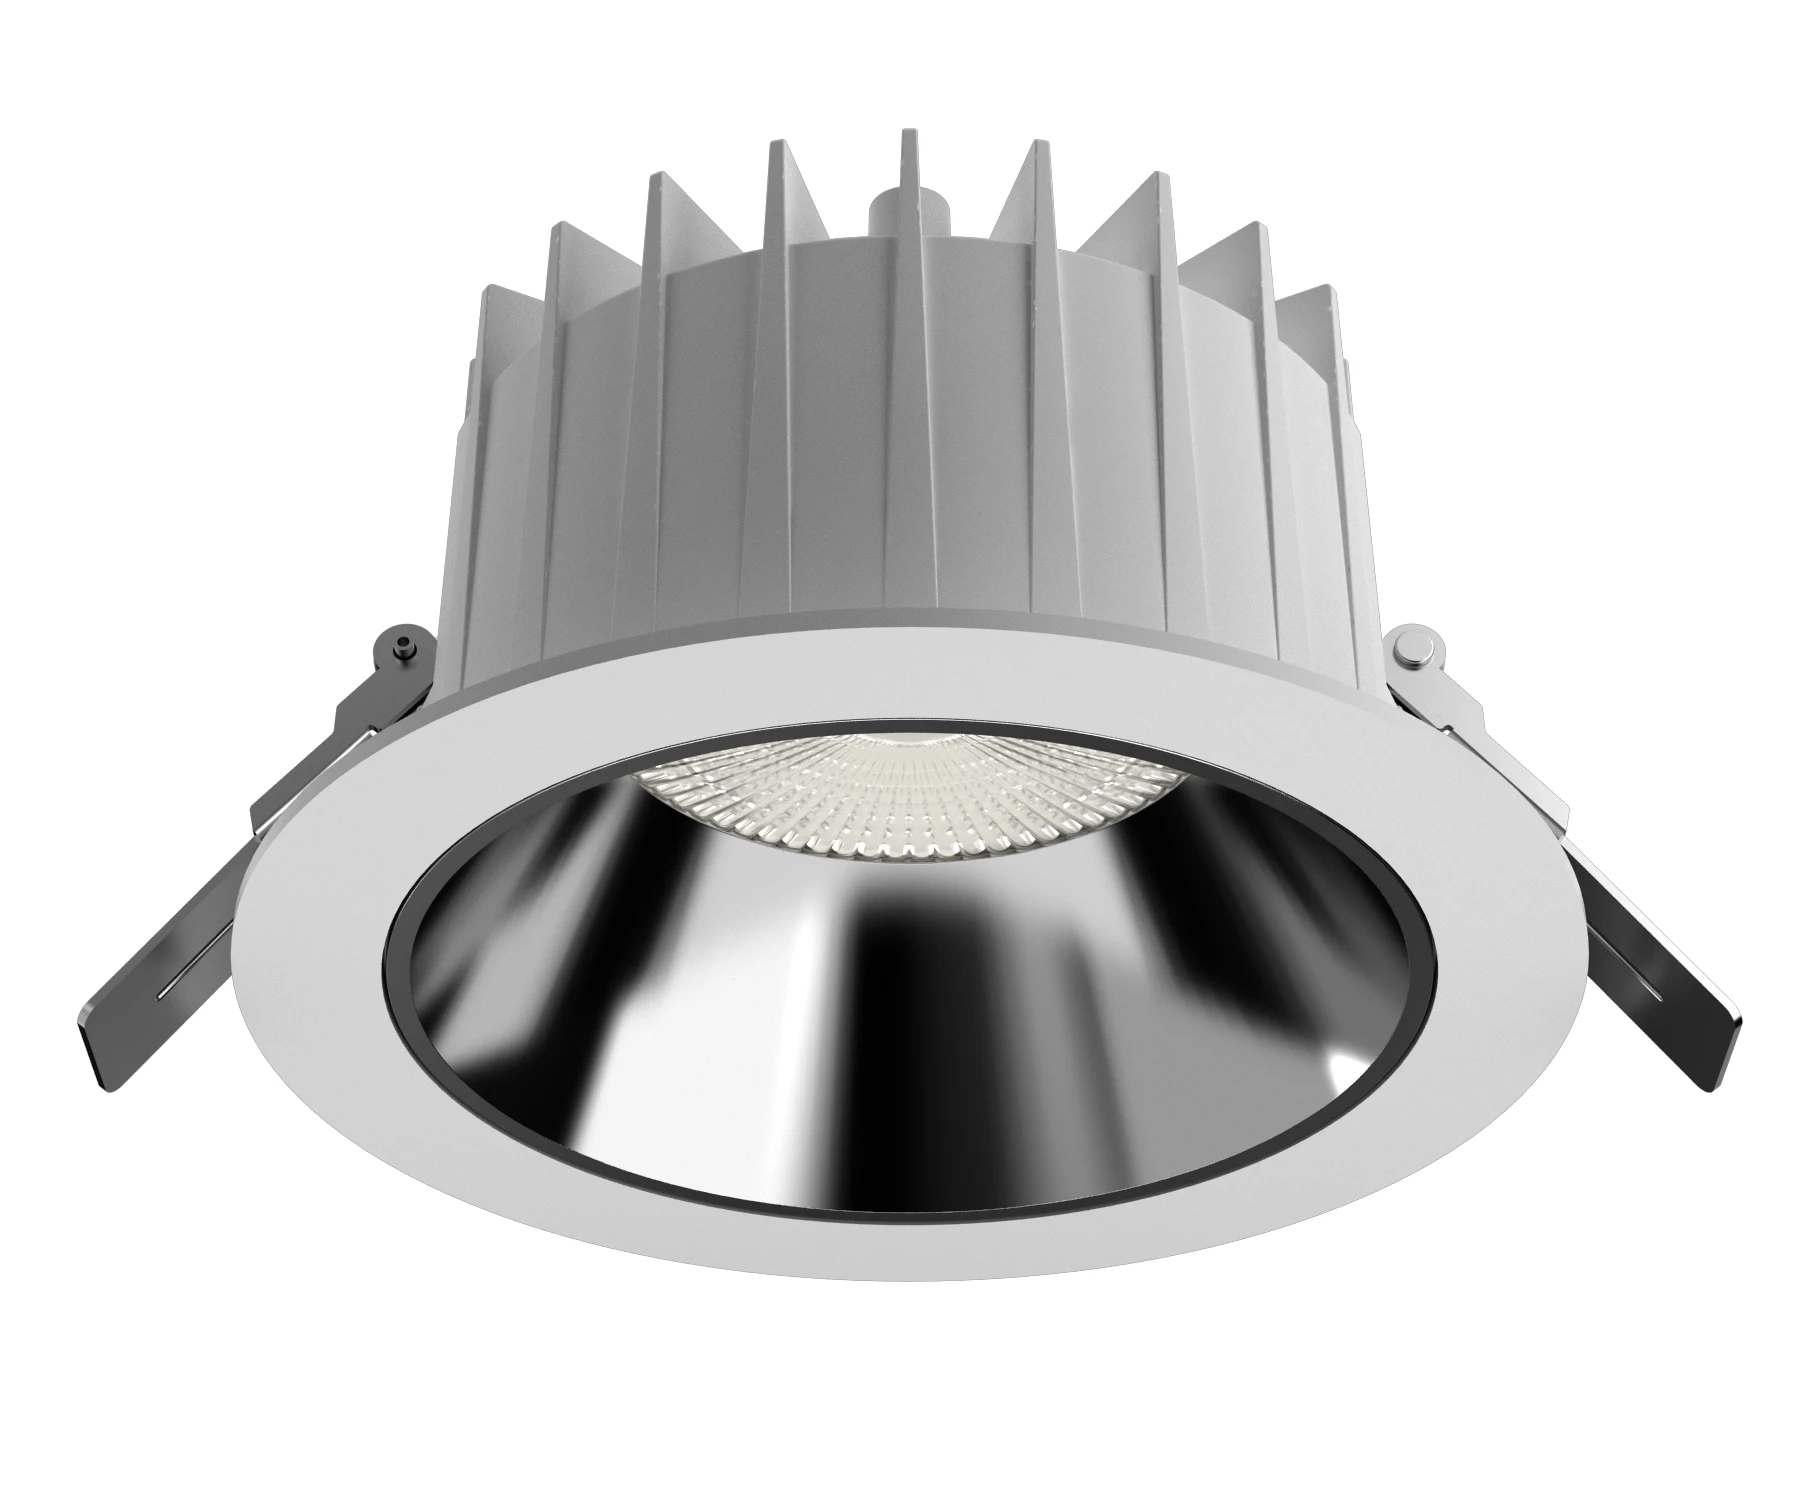 VACE new design big watt led downlight 40W SMD over 100lm/w efficiency down light aluminum lamp for architectural